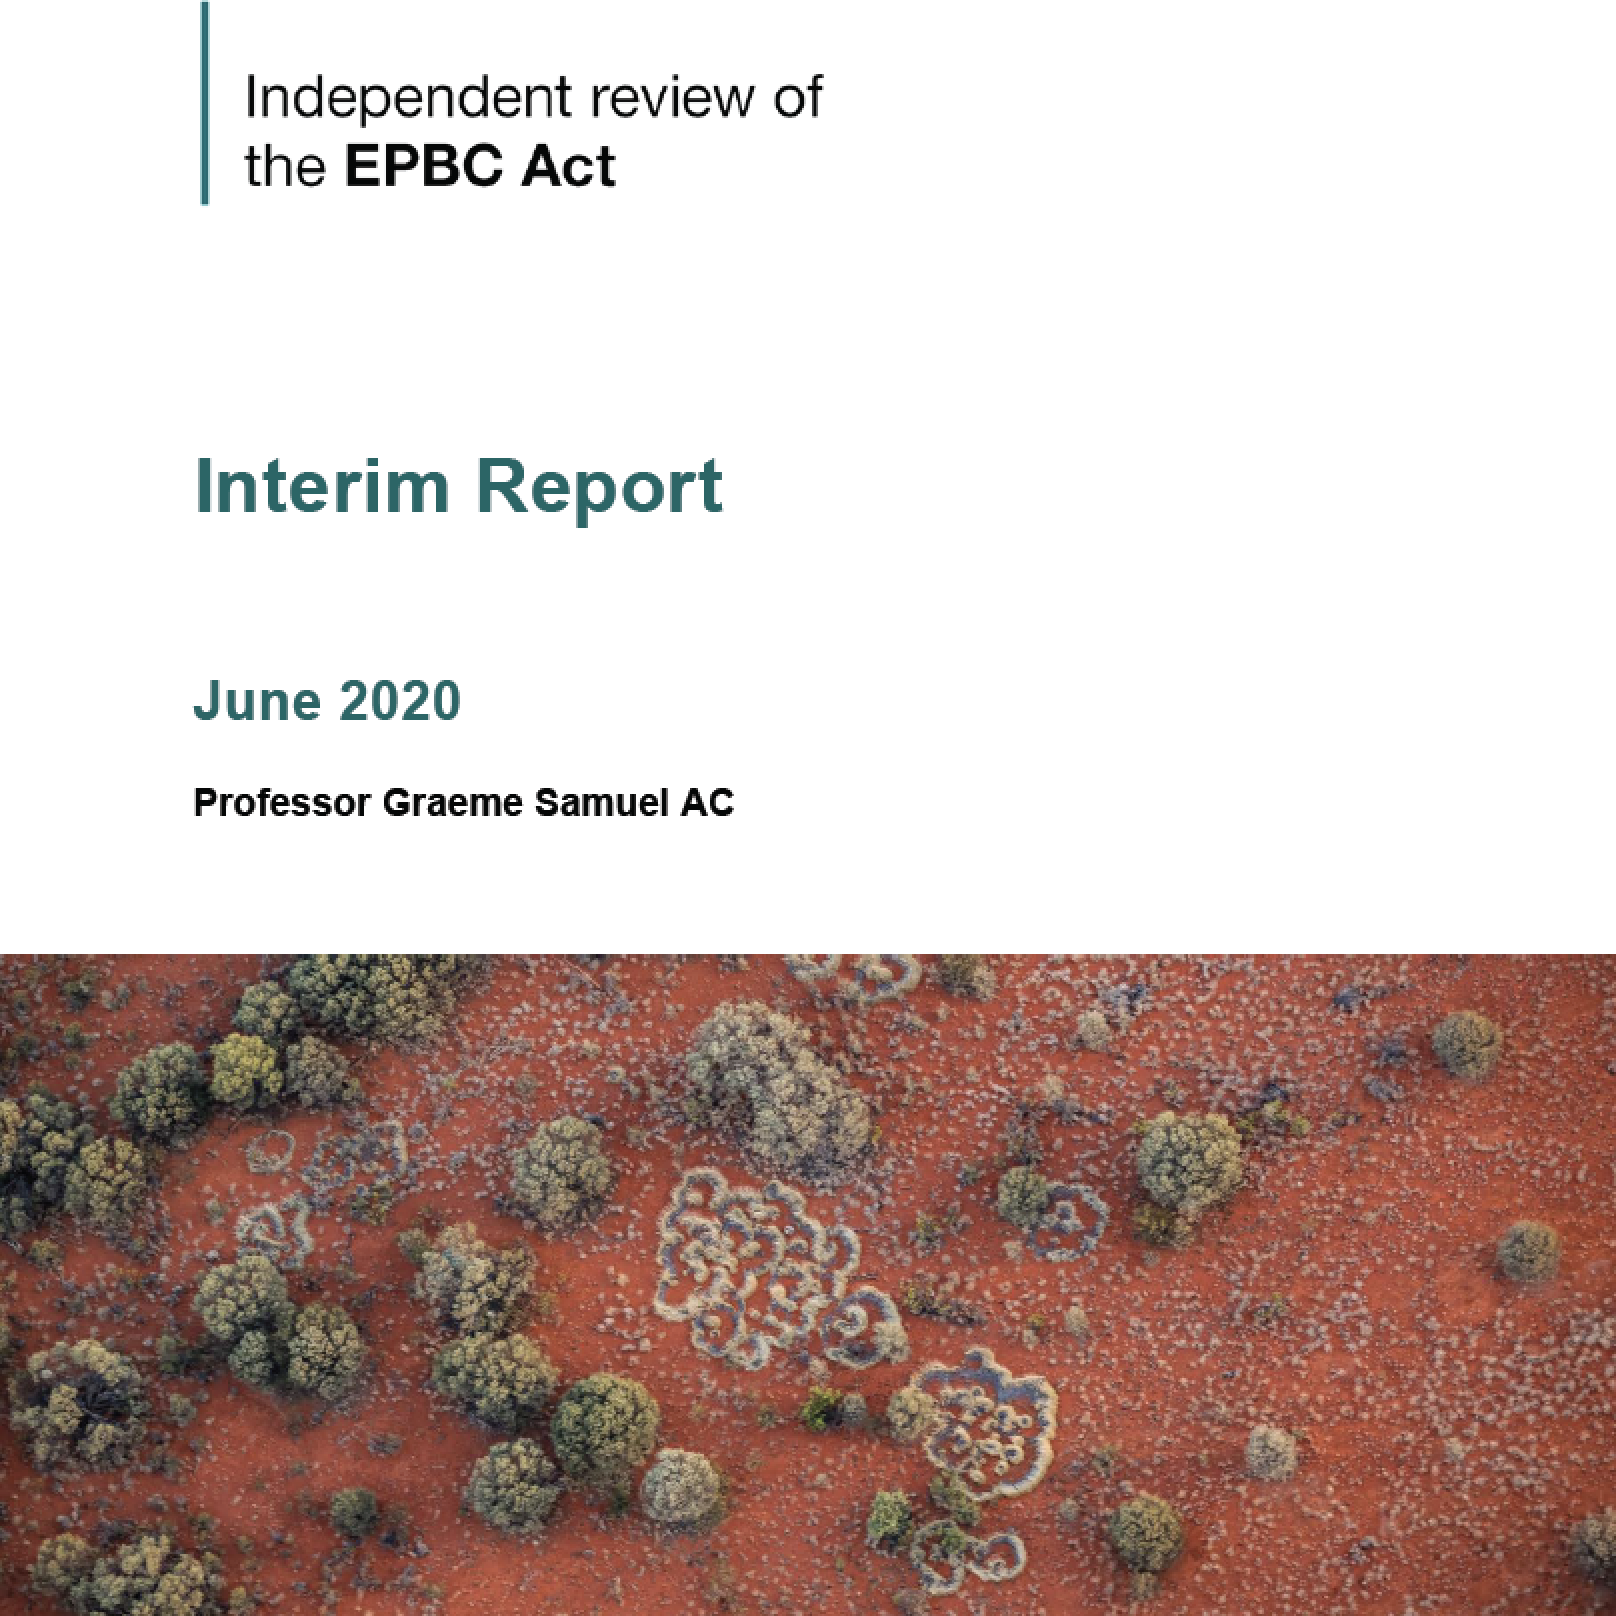 independent review of the EPBC Act interim report